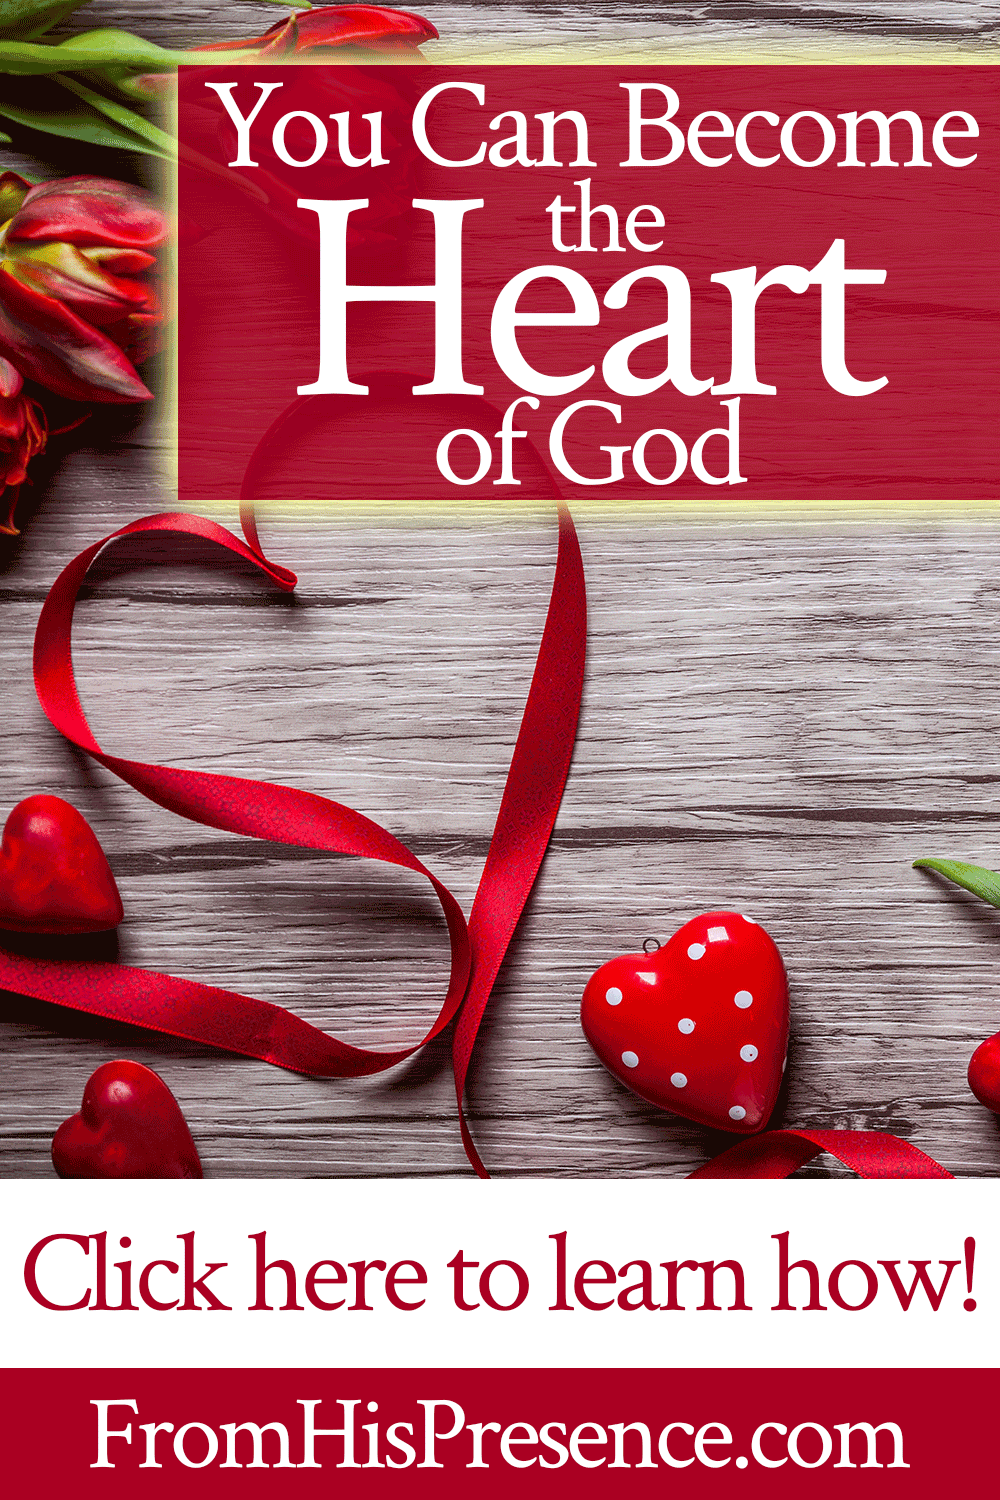 You Can Become the Heart of God | by Jamie Rohrbaugh | FromHisPresence.com